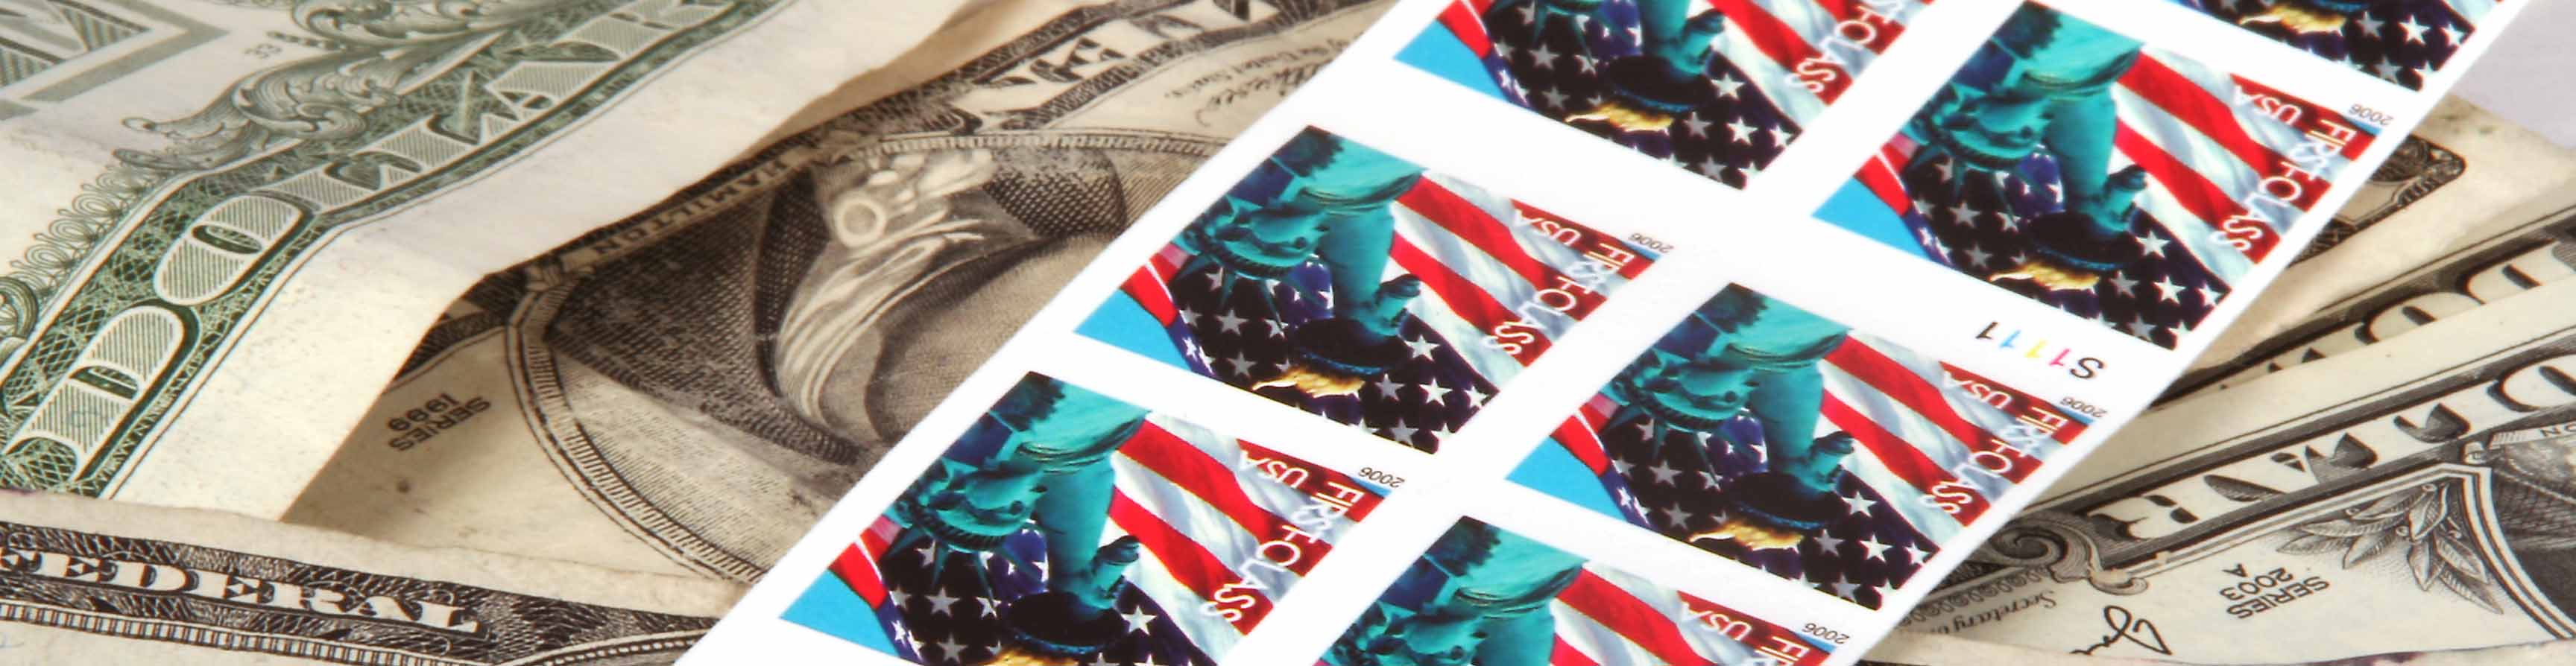 usps stamps by mail